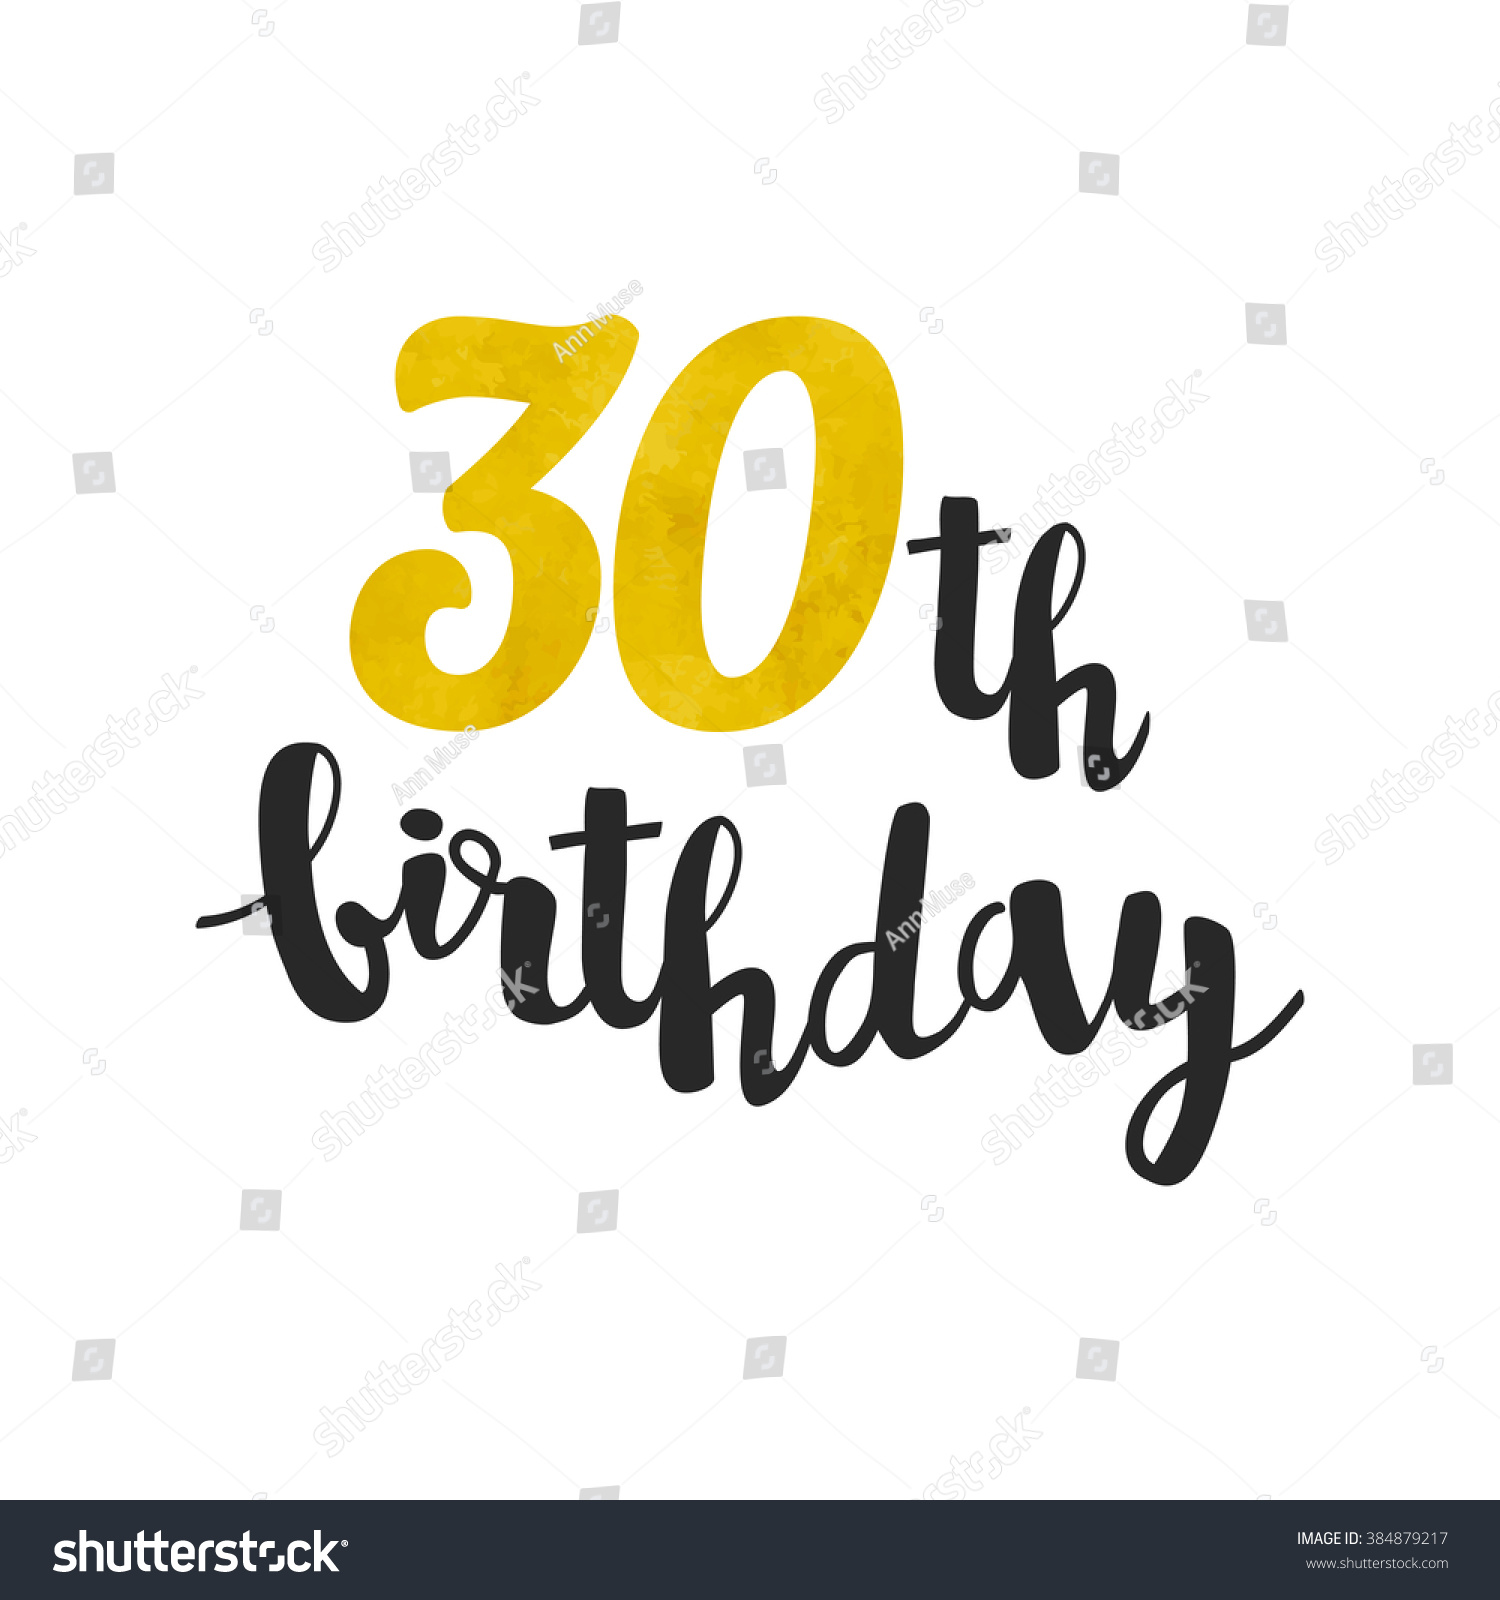 Vector Gold Foil 30th Birthday Calligraphy Stock Vector 384879217 ...